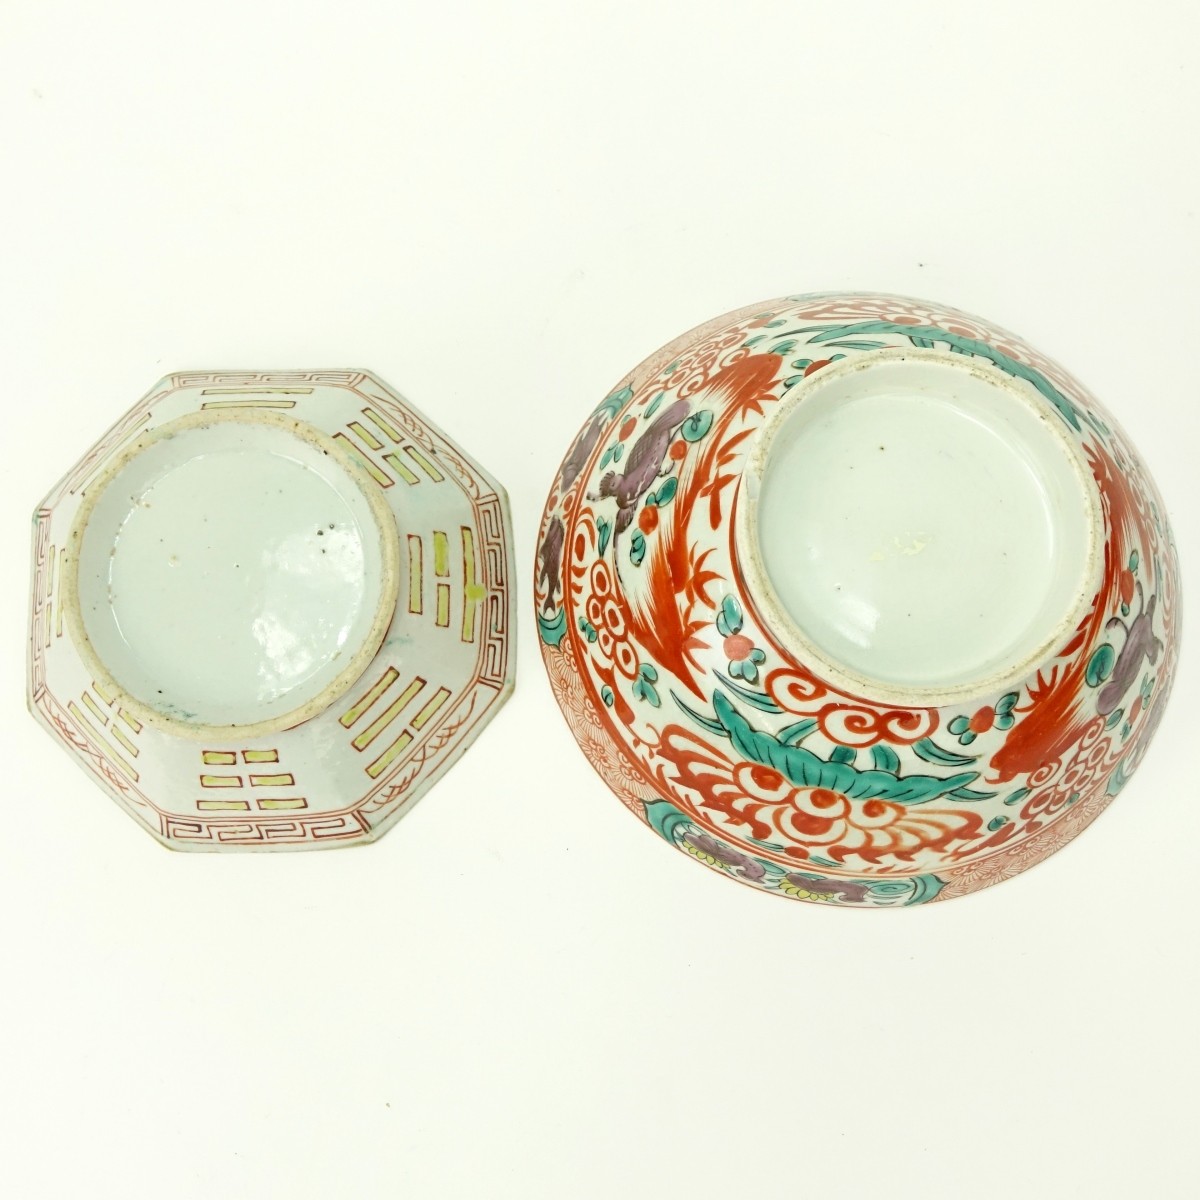 Two (2) Chinese Export Porcelain Bowls